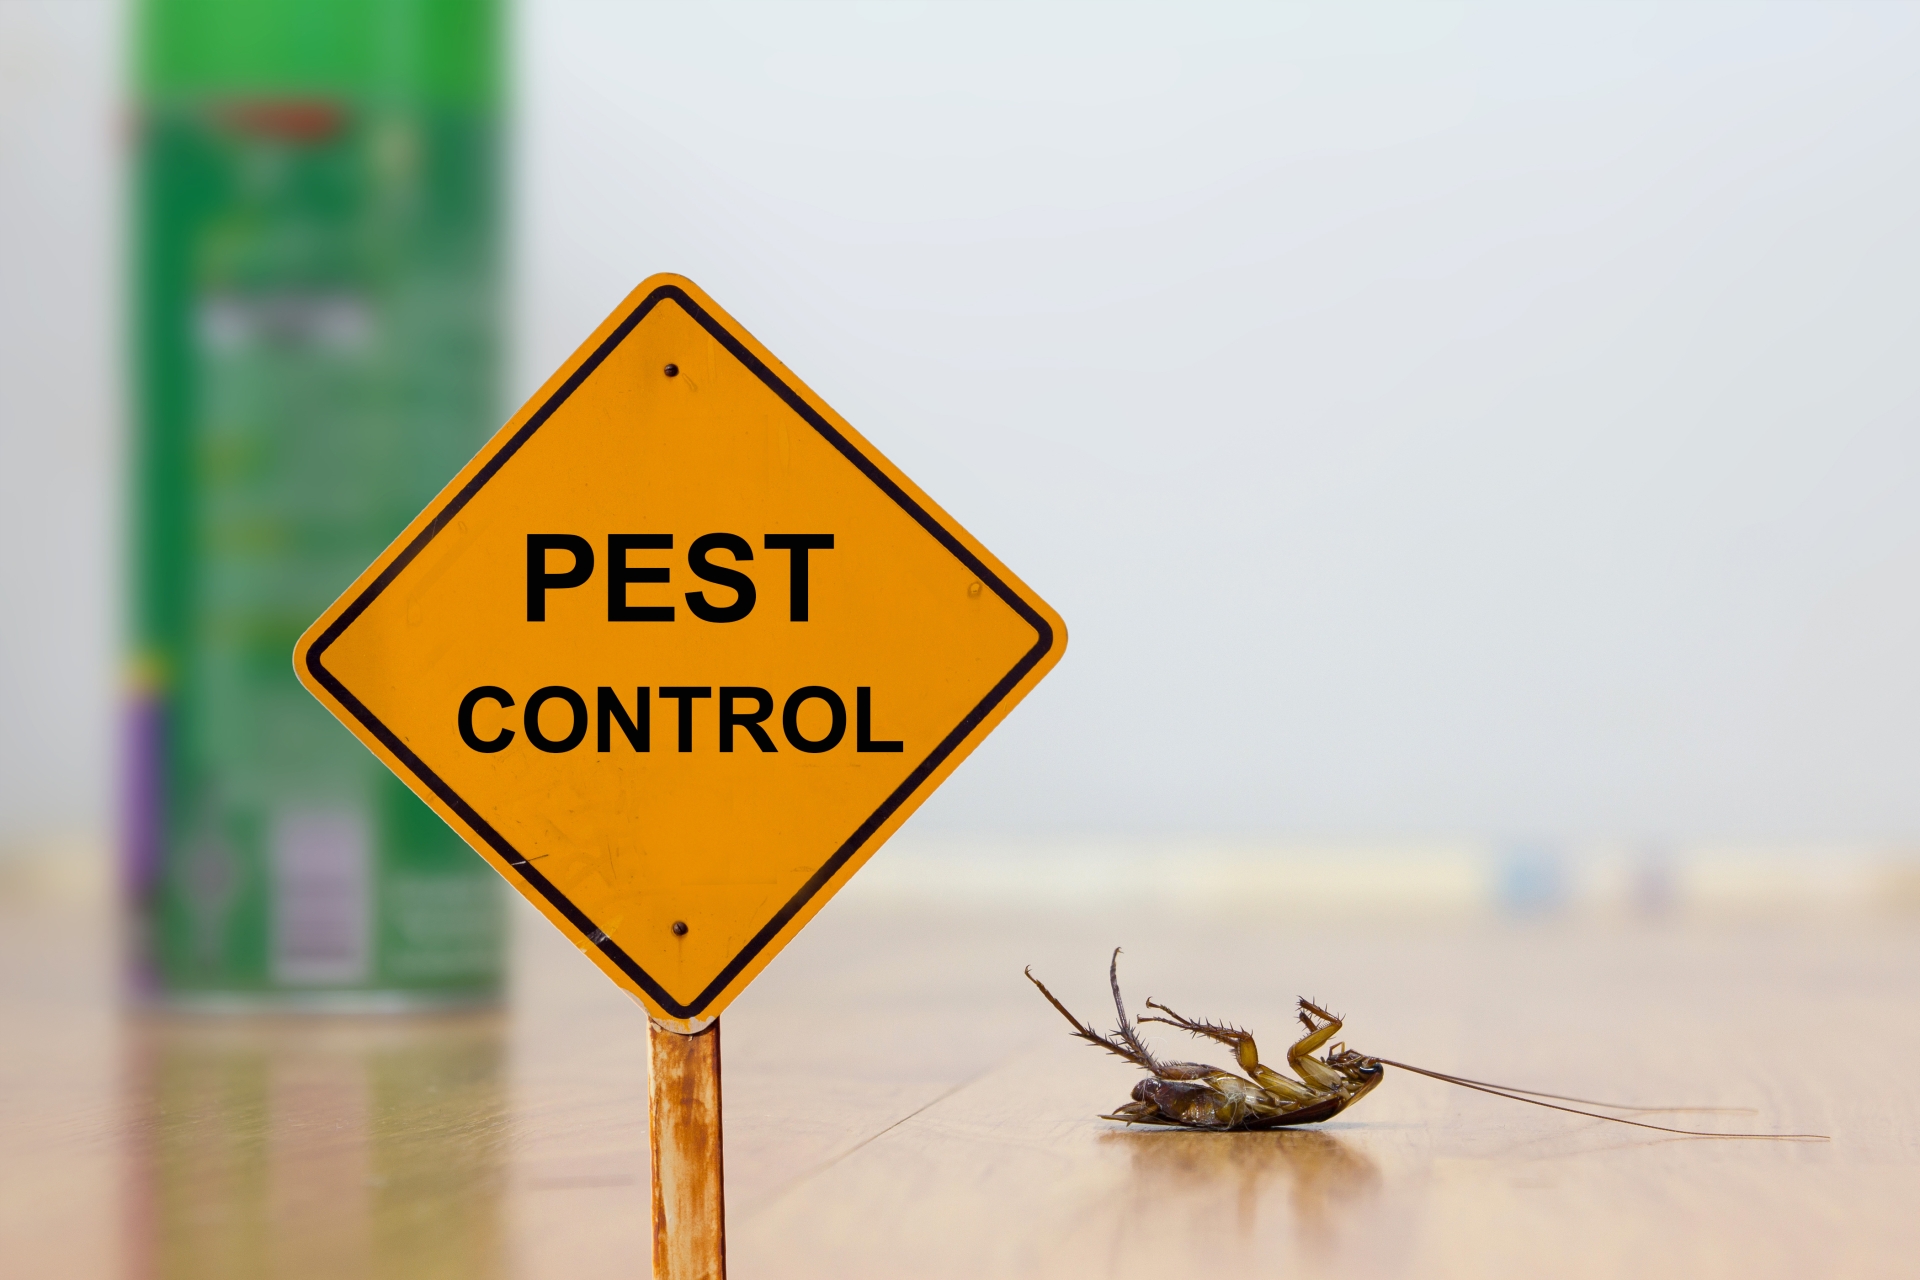 24 Hour Pest Control, Pest Control in Clayhall, IG5. Call Now 020 8166 9746